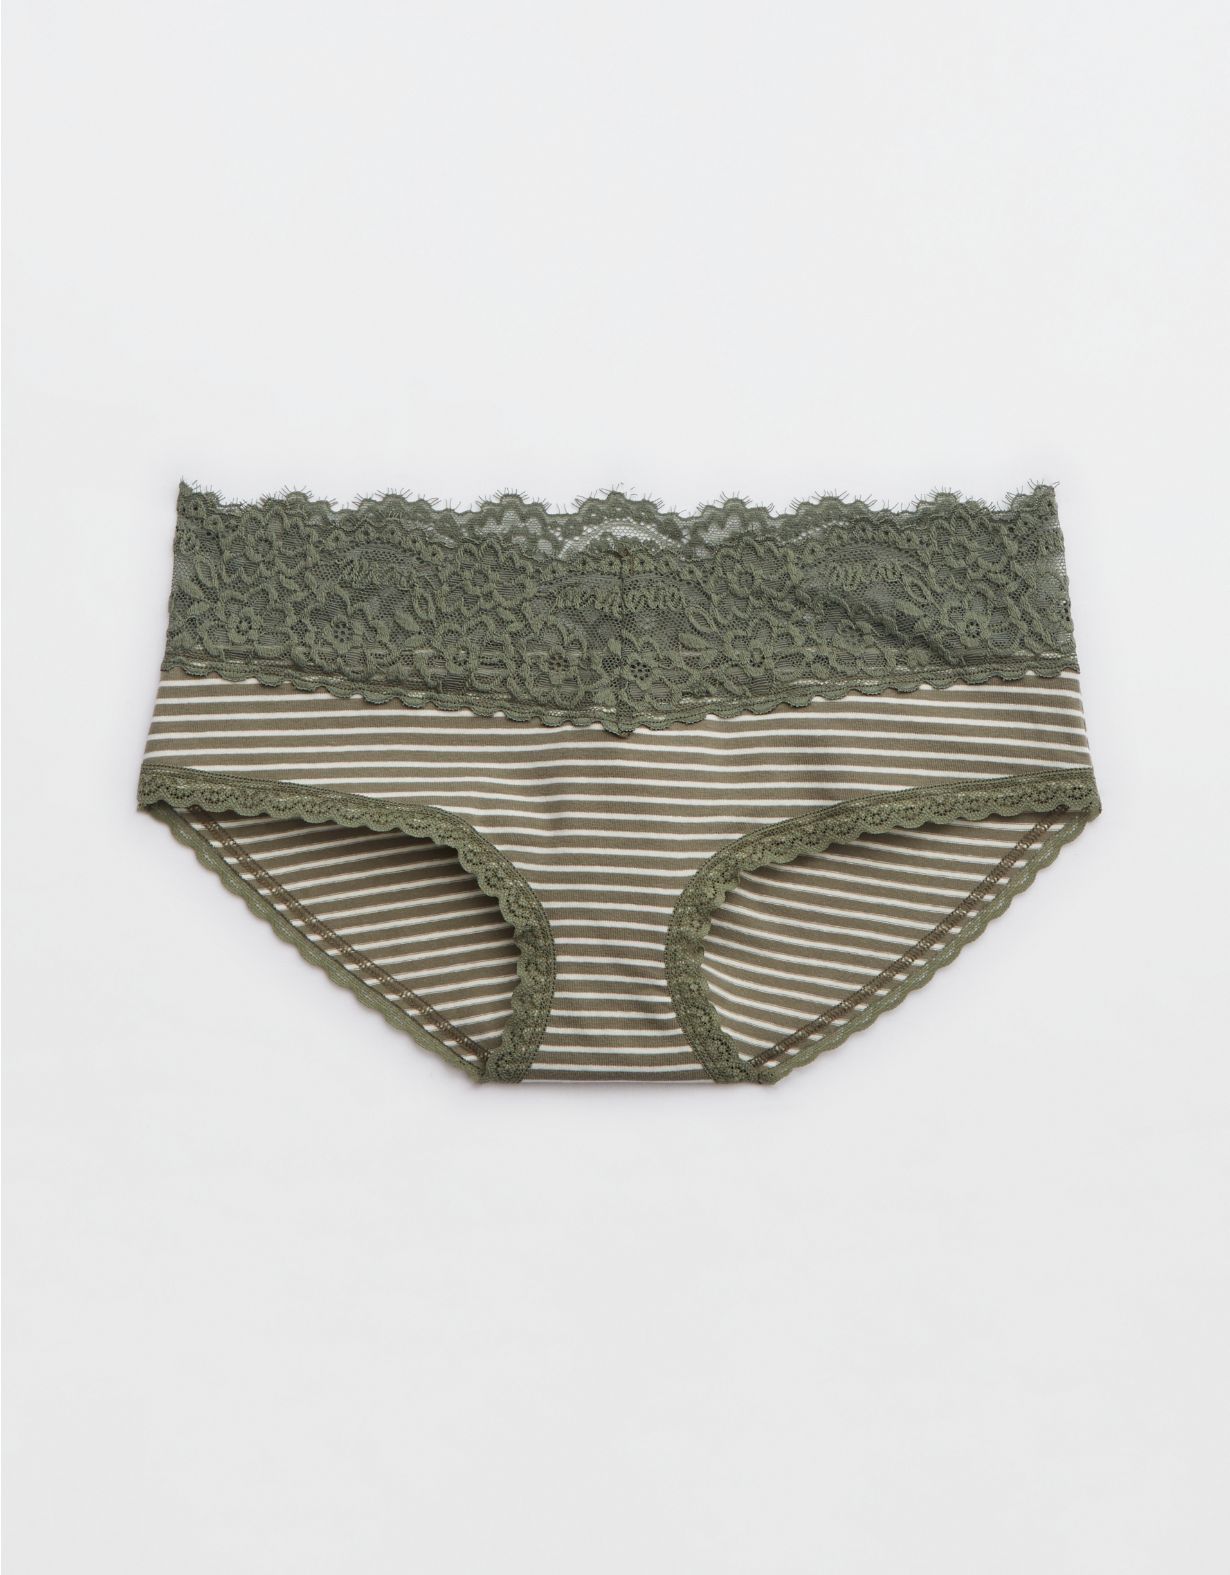 Aerie Cotton Eyelash Lace Boybrief Underwear | American Eagle Outfitters (US & CA)